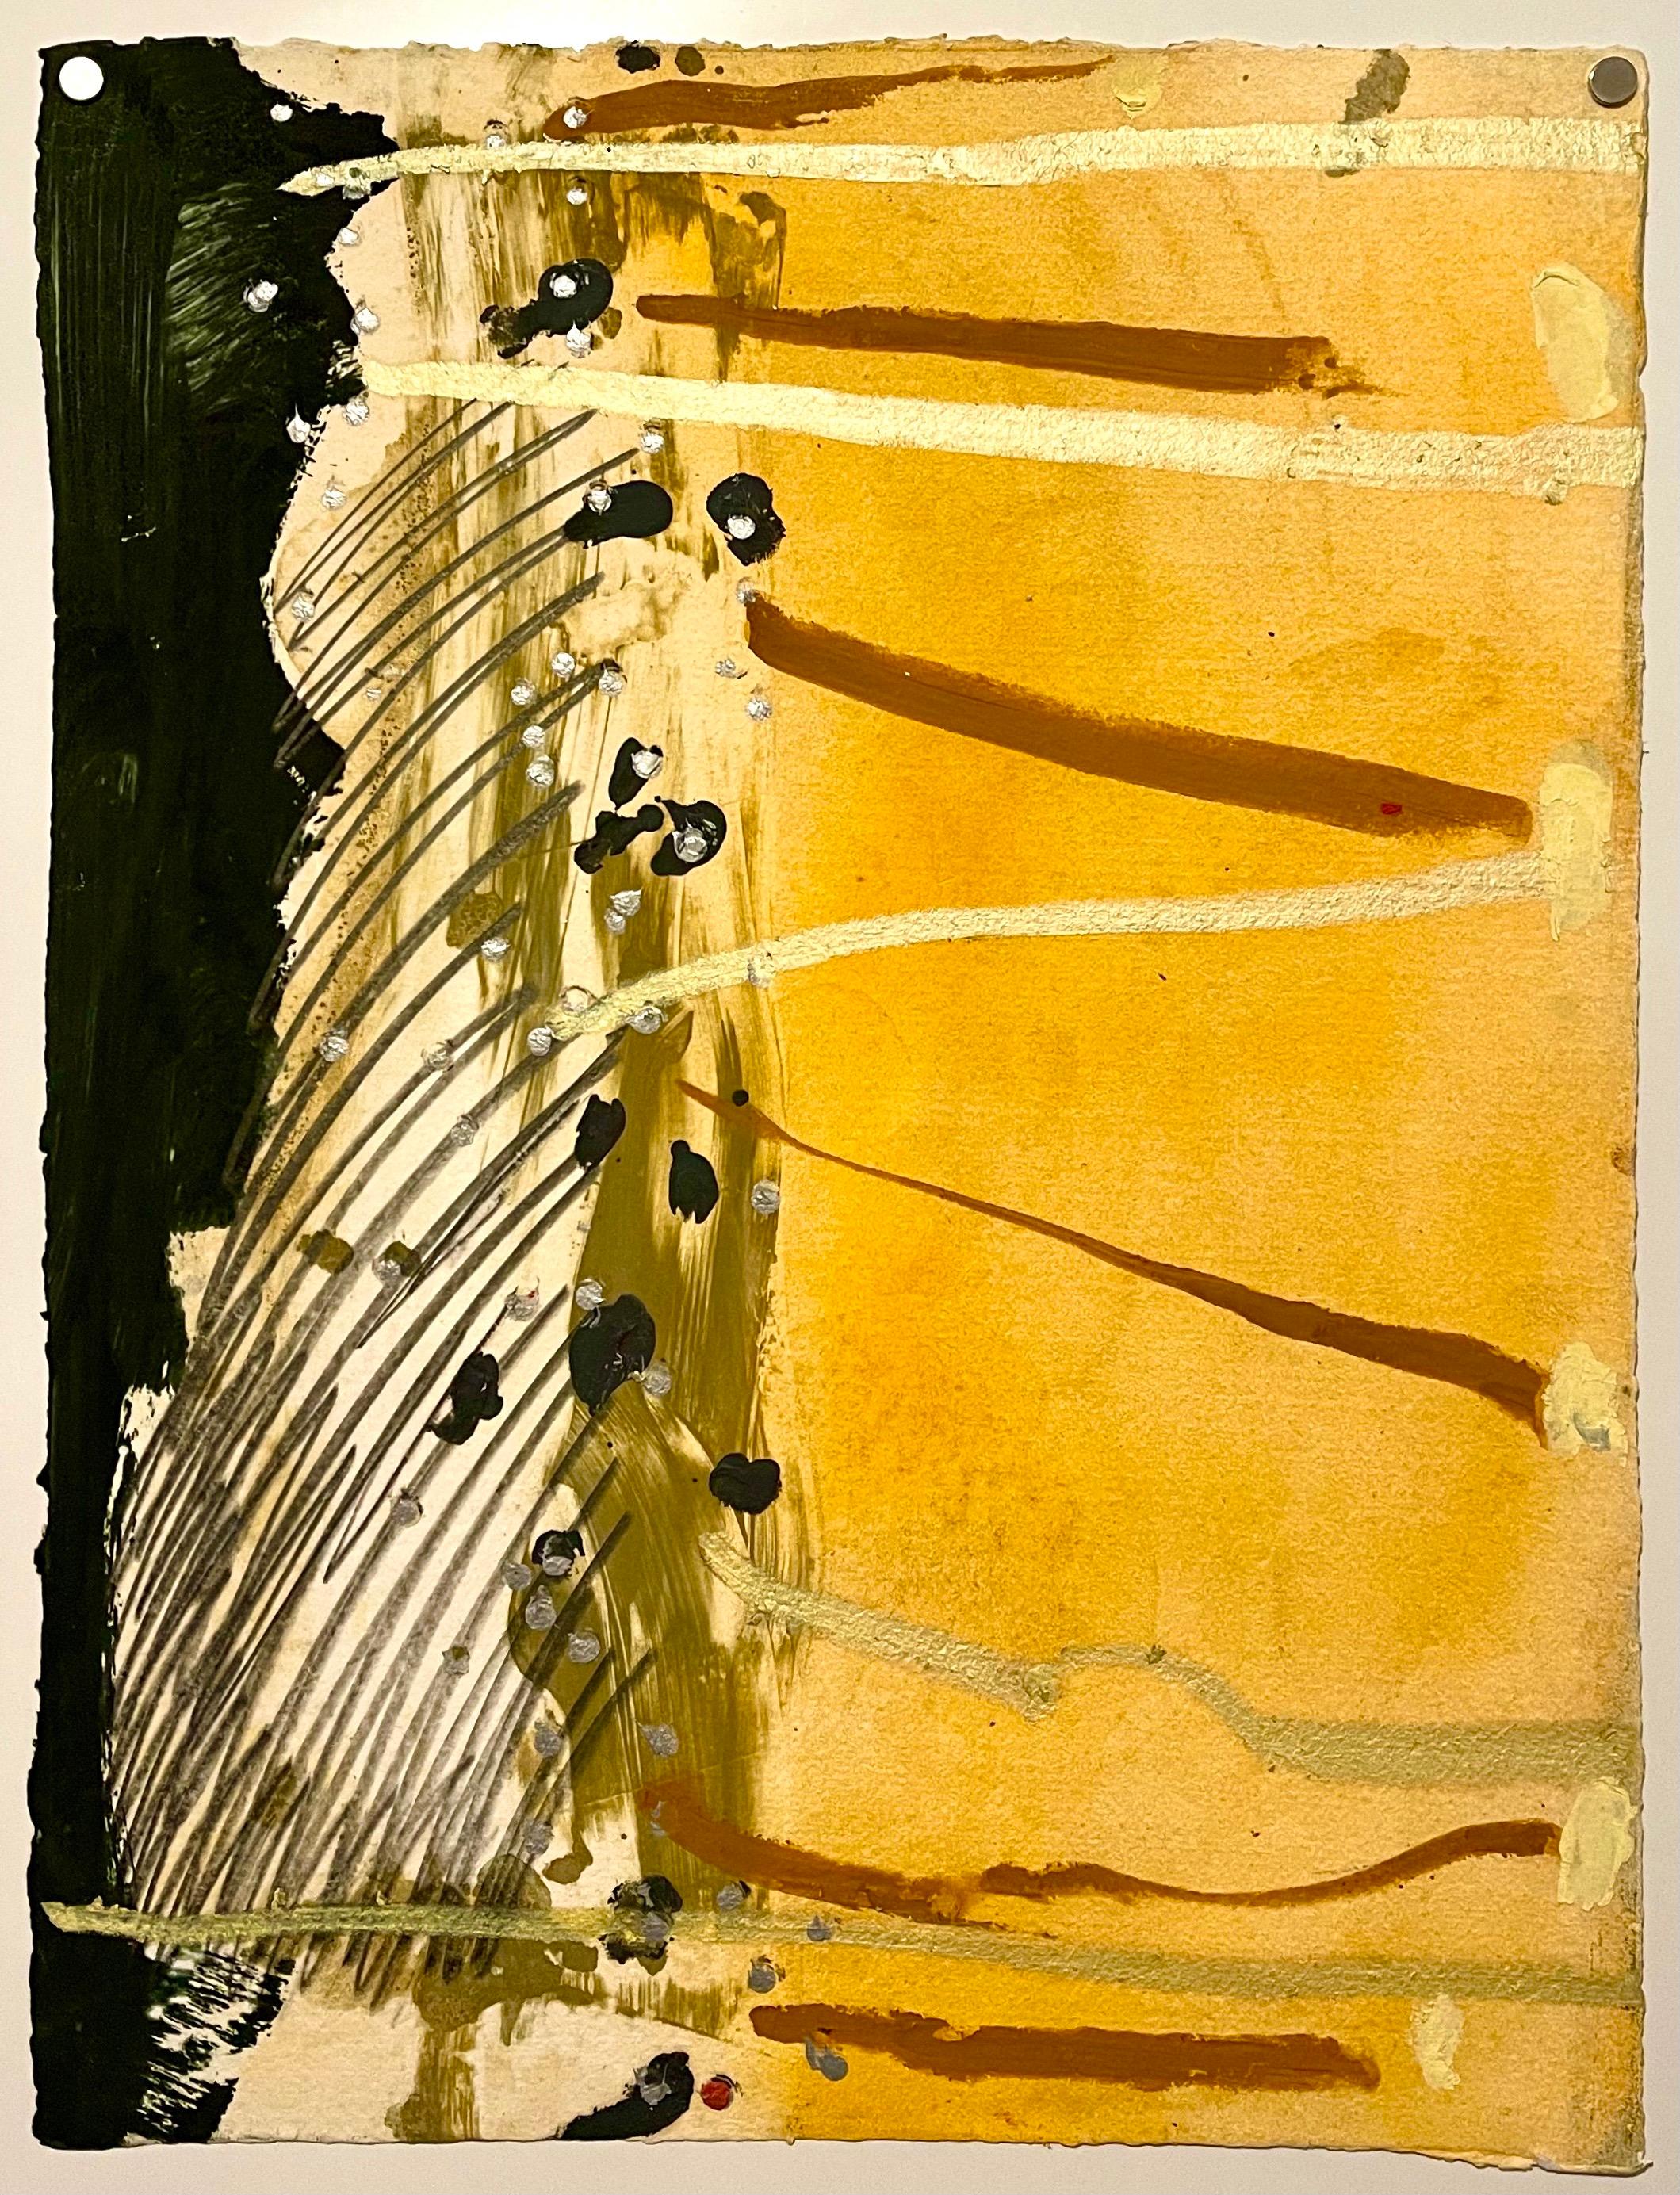 Stanley Boxer Mixed Media Abstract Expressionist Painting on Paper, Gold